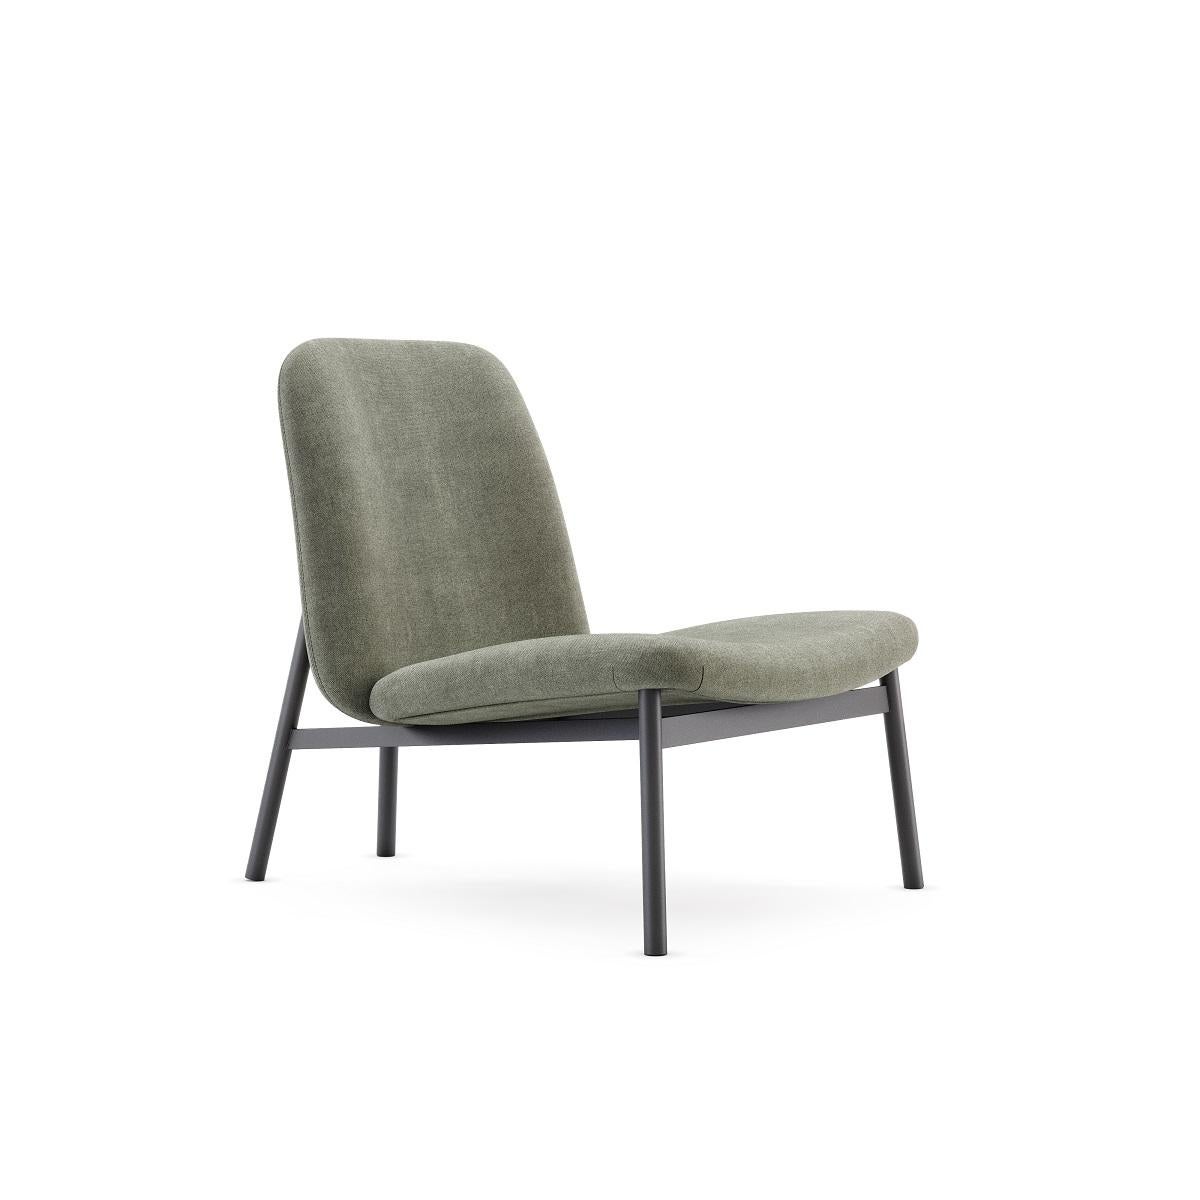 The back and the seat of this armchair designed with a slight ergonomic curve to upgrade your level of relaxation for prolonged sittings. The solid metal structure in black texturized steel provides greater support for the upholstered seat and